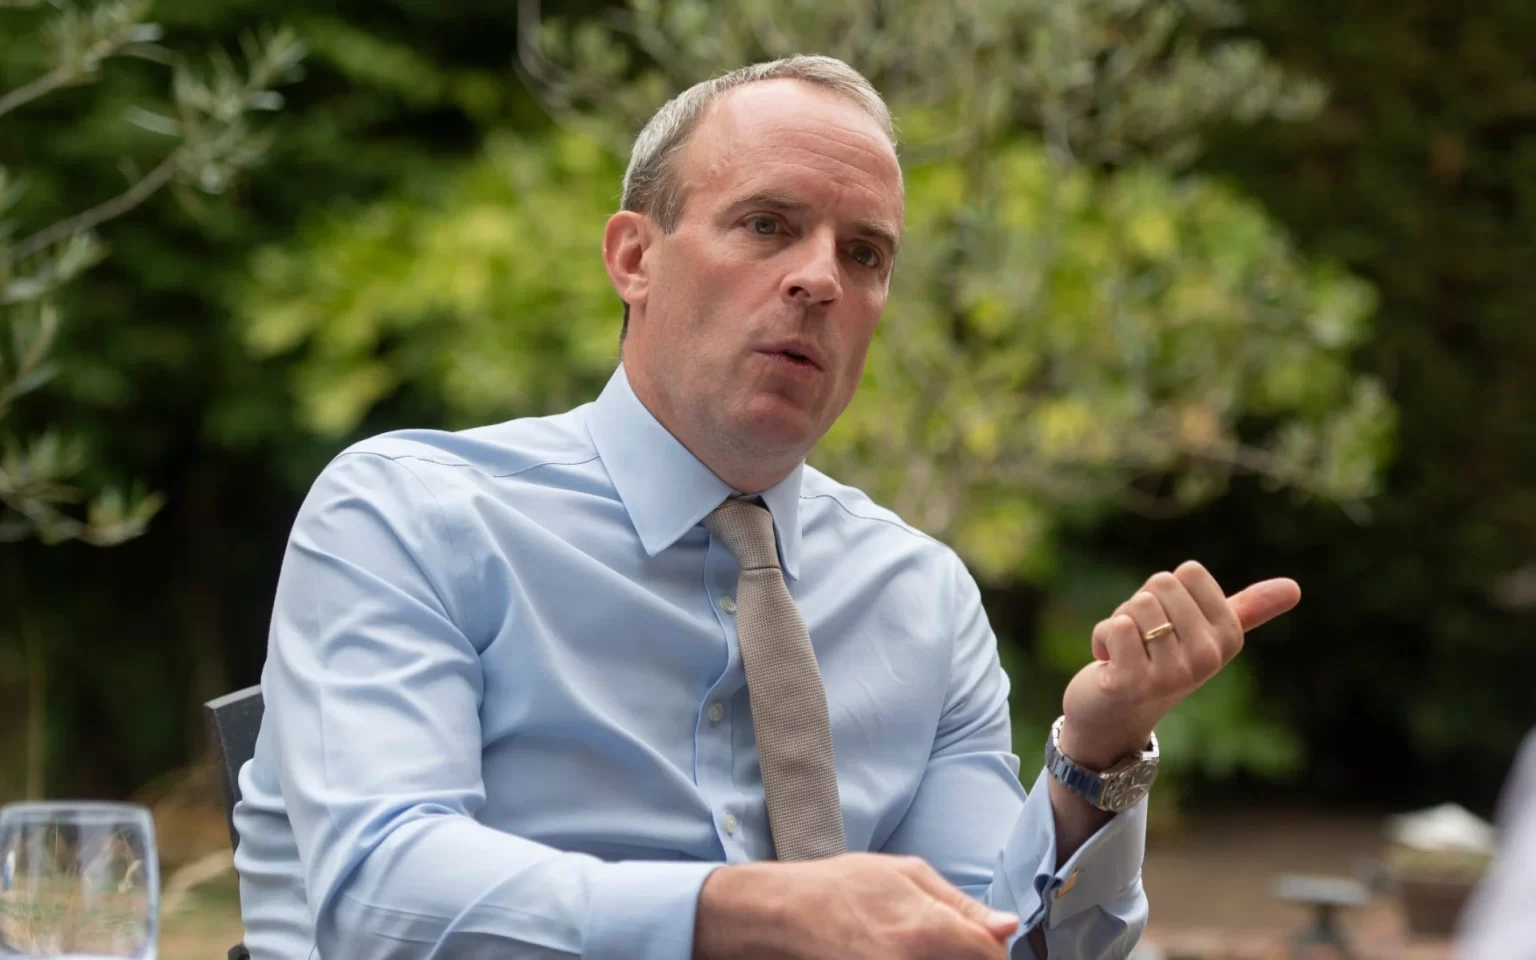 Third official interviewed in Dominic Raab bullying probe 